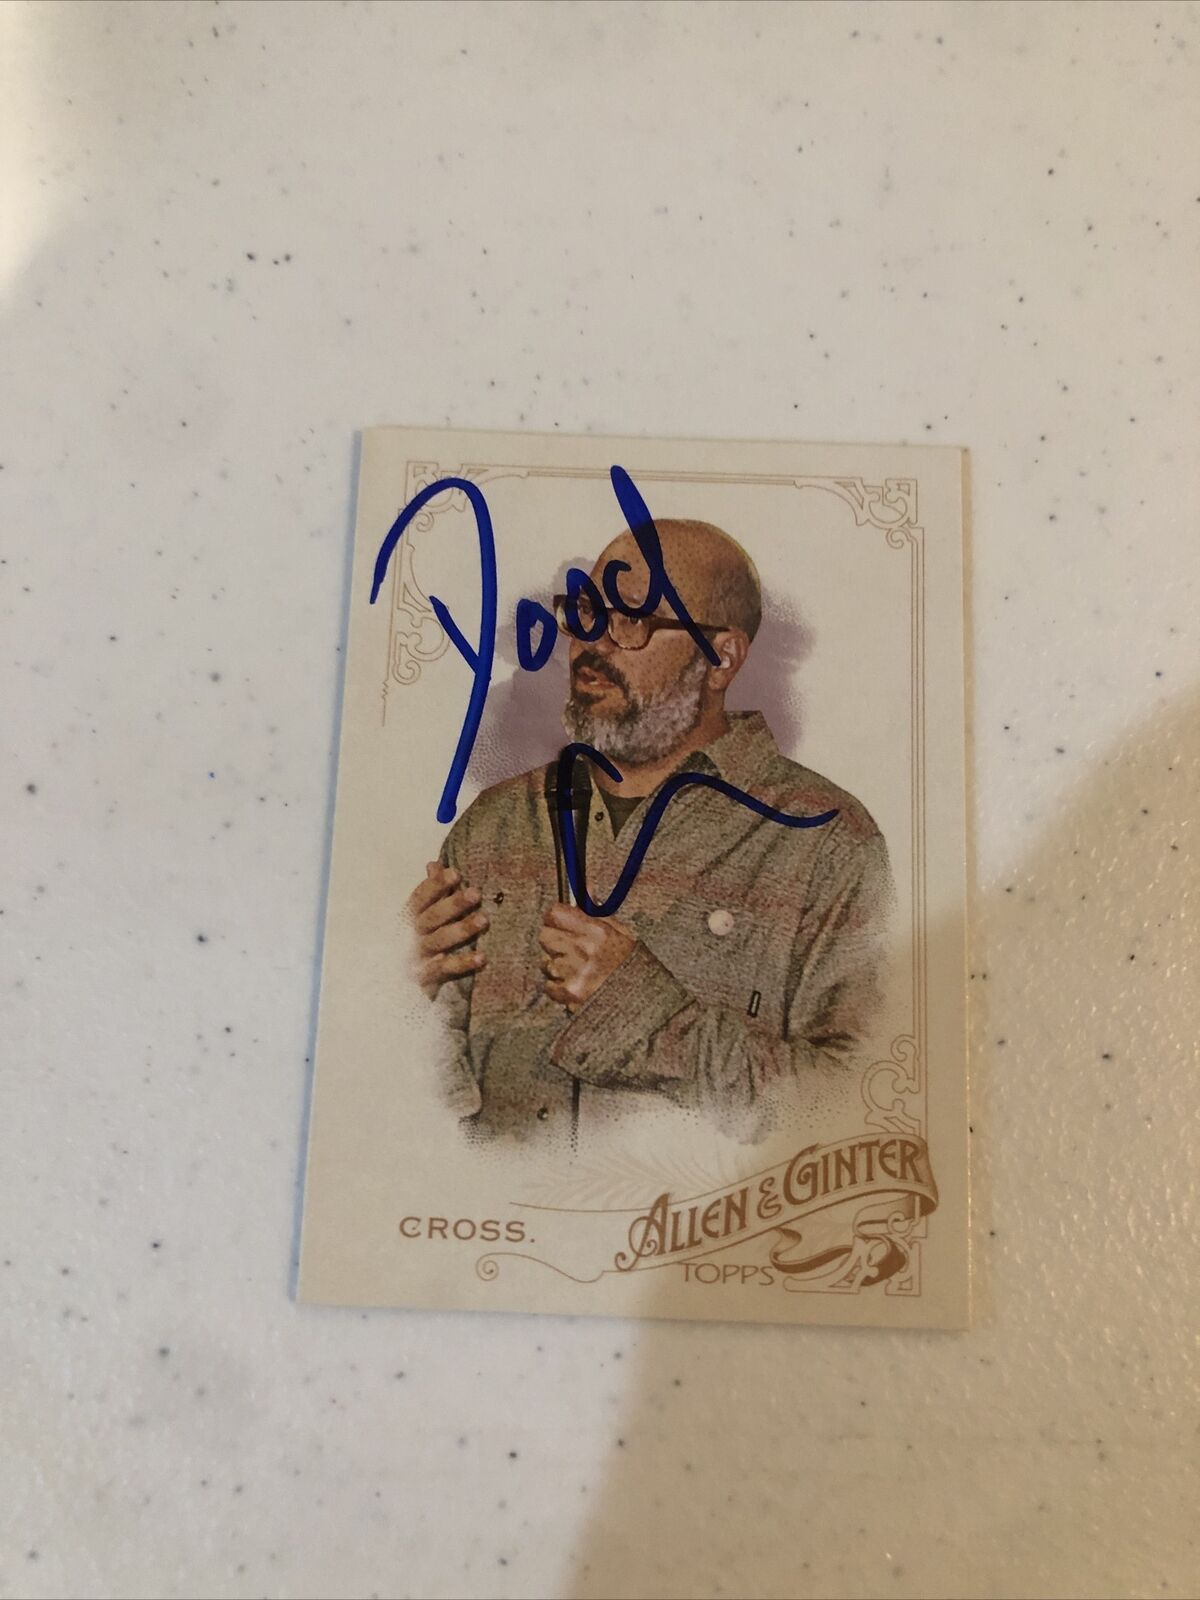 DAVID CROSS SIGNED AUTOGRAPH 2015 TOPPS ALLEN & GINTER TRADING CARD ACTOR COMEDY